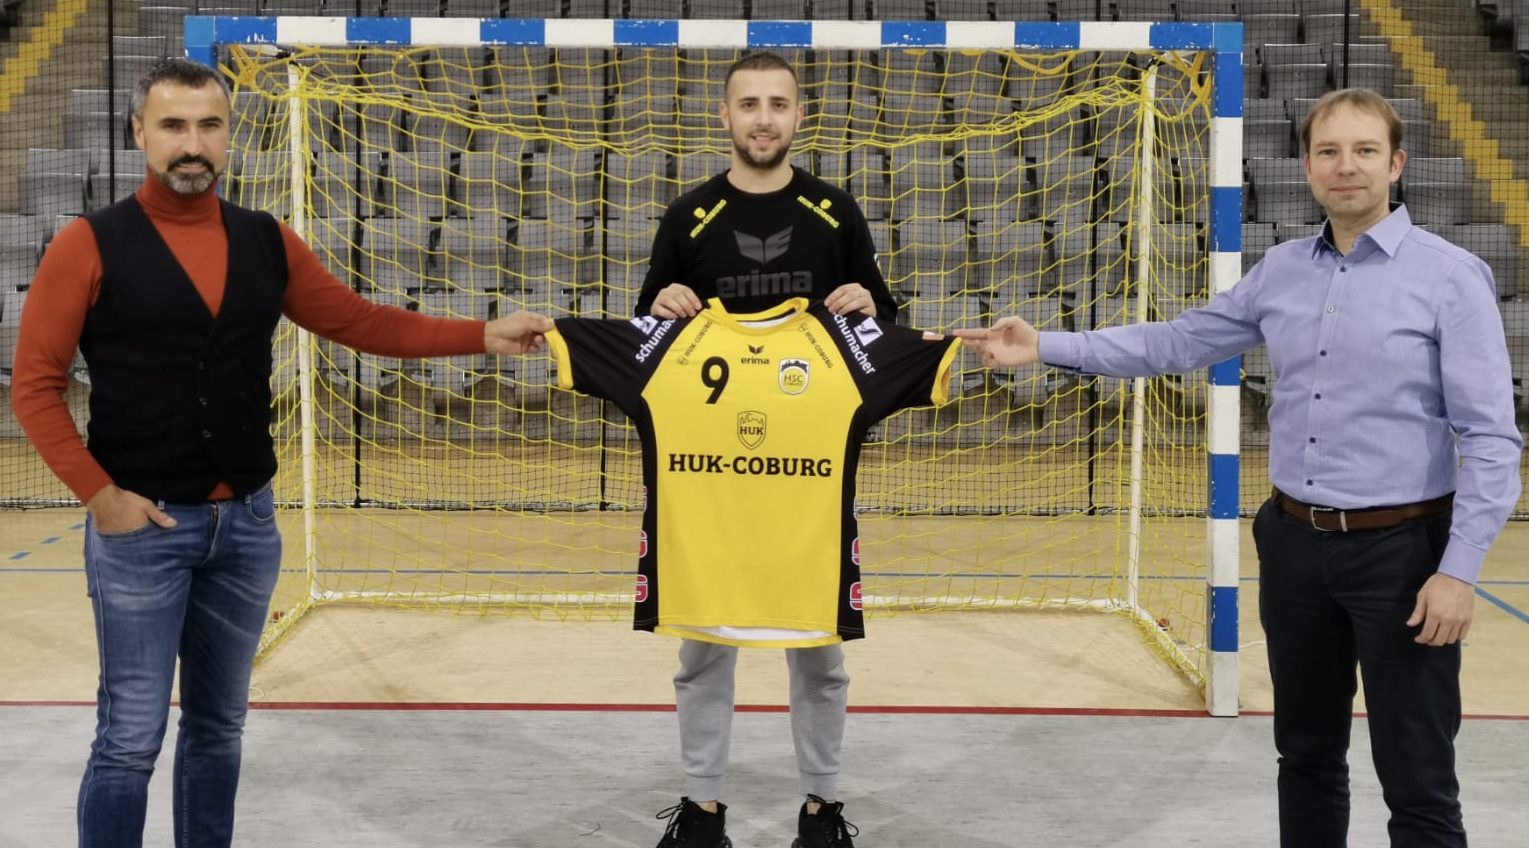 Top scorer of SEHA LEAGUE 2019 Signs two-year contract with BUNDESLIGA team HSC COBURG